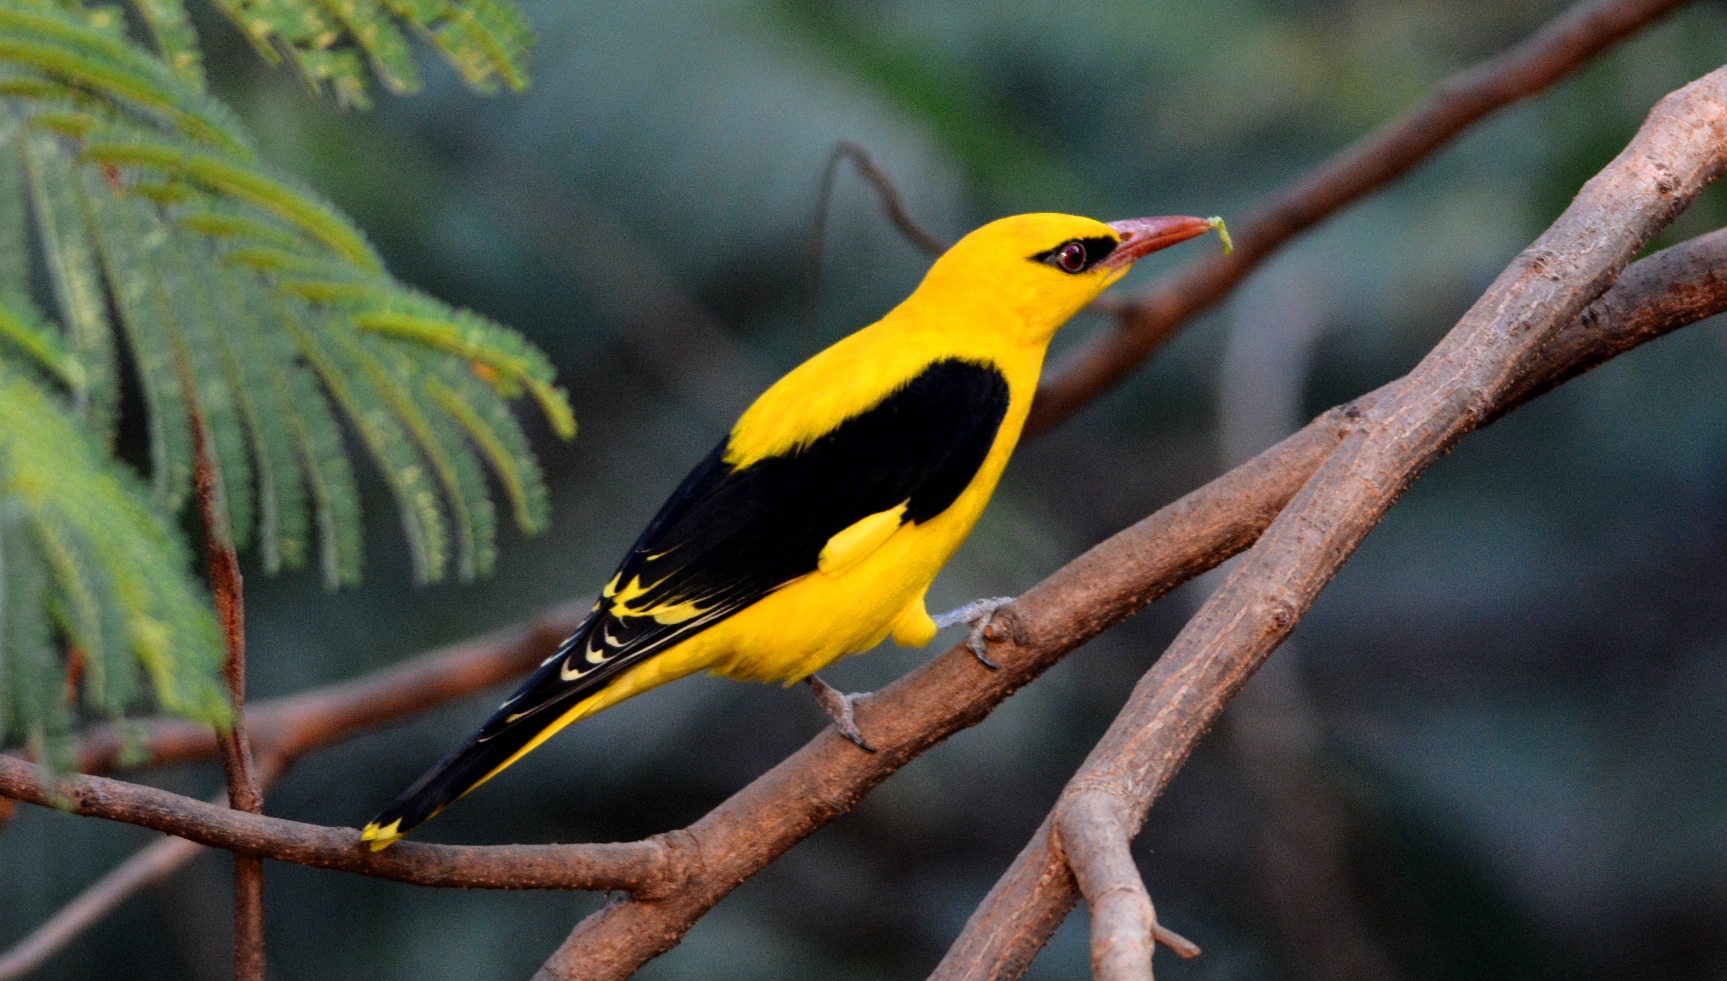 Indian Golden Oriole Bird Image Free Download - Indian Golden Oriole Male , HD Wallpaper & Backgrounds